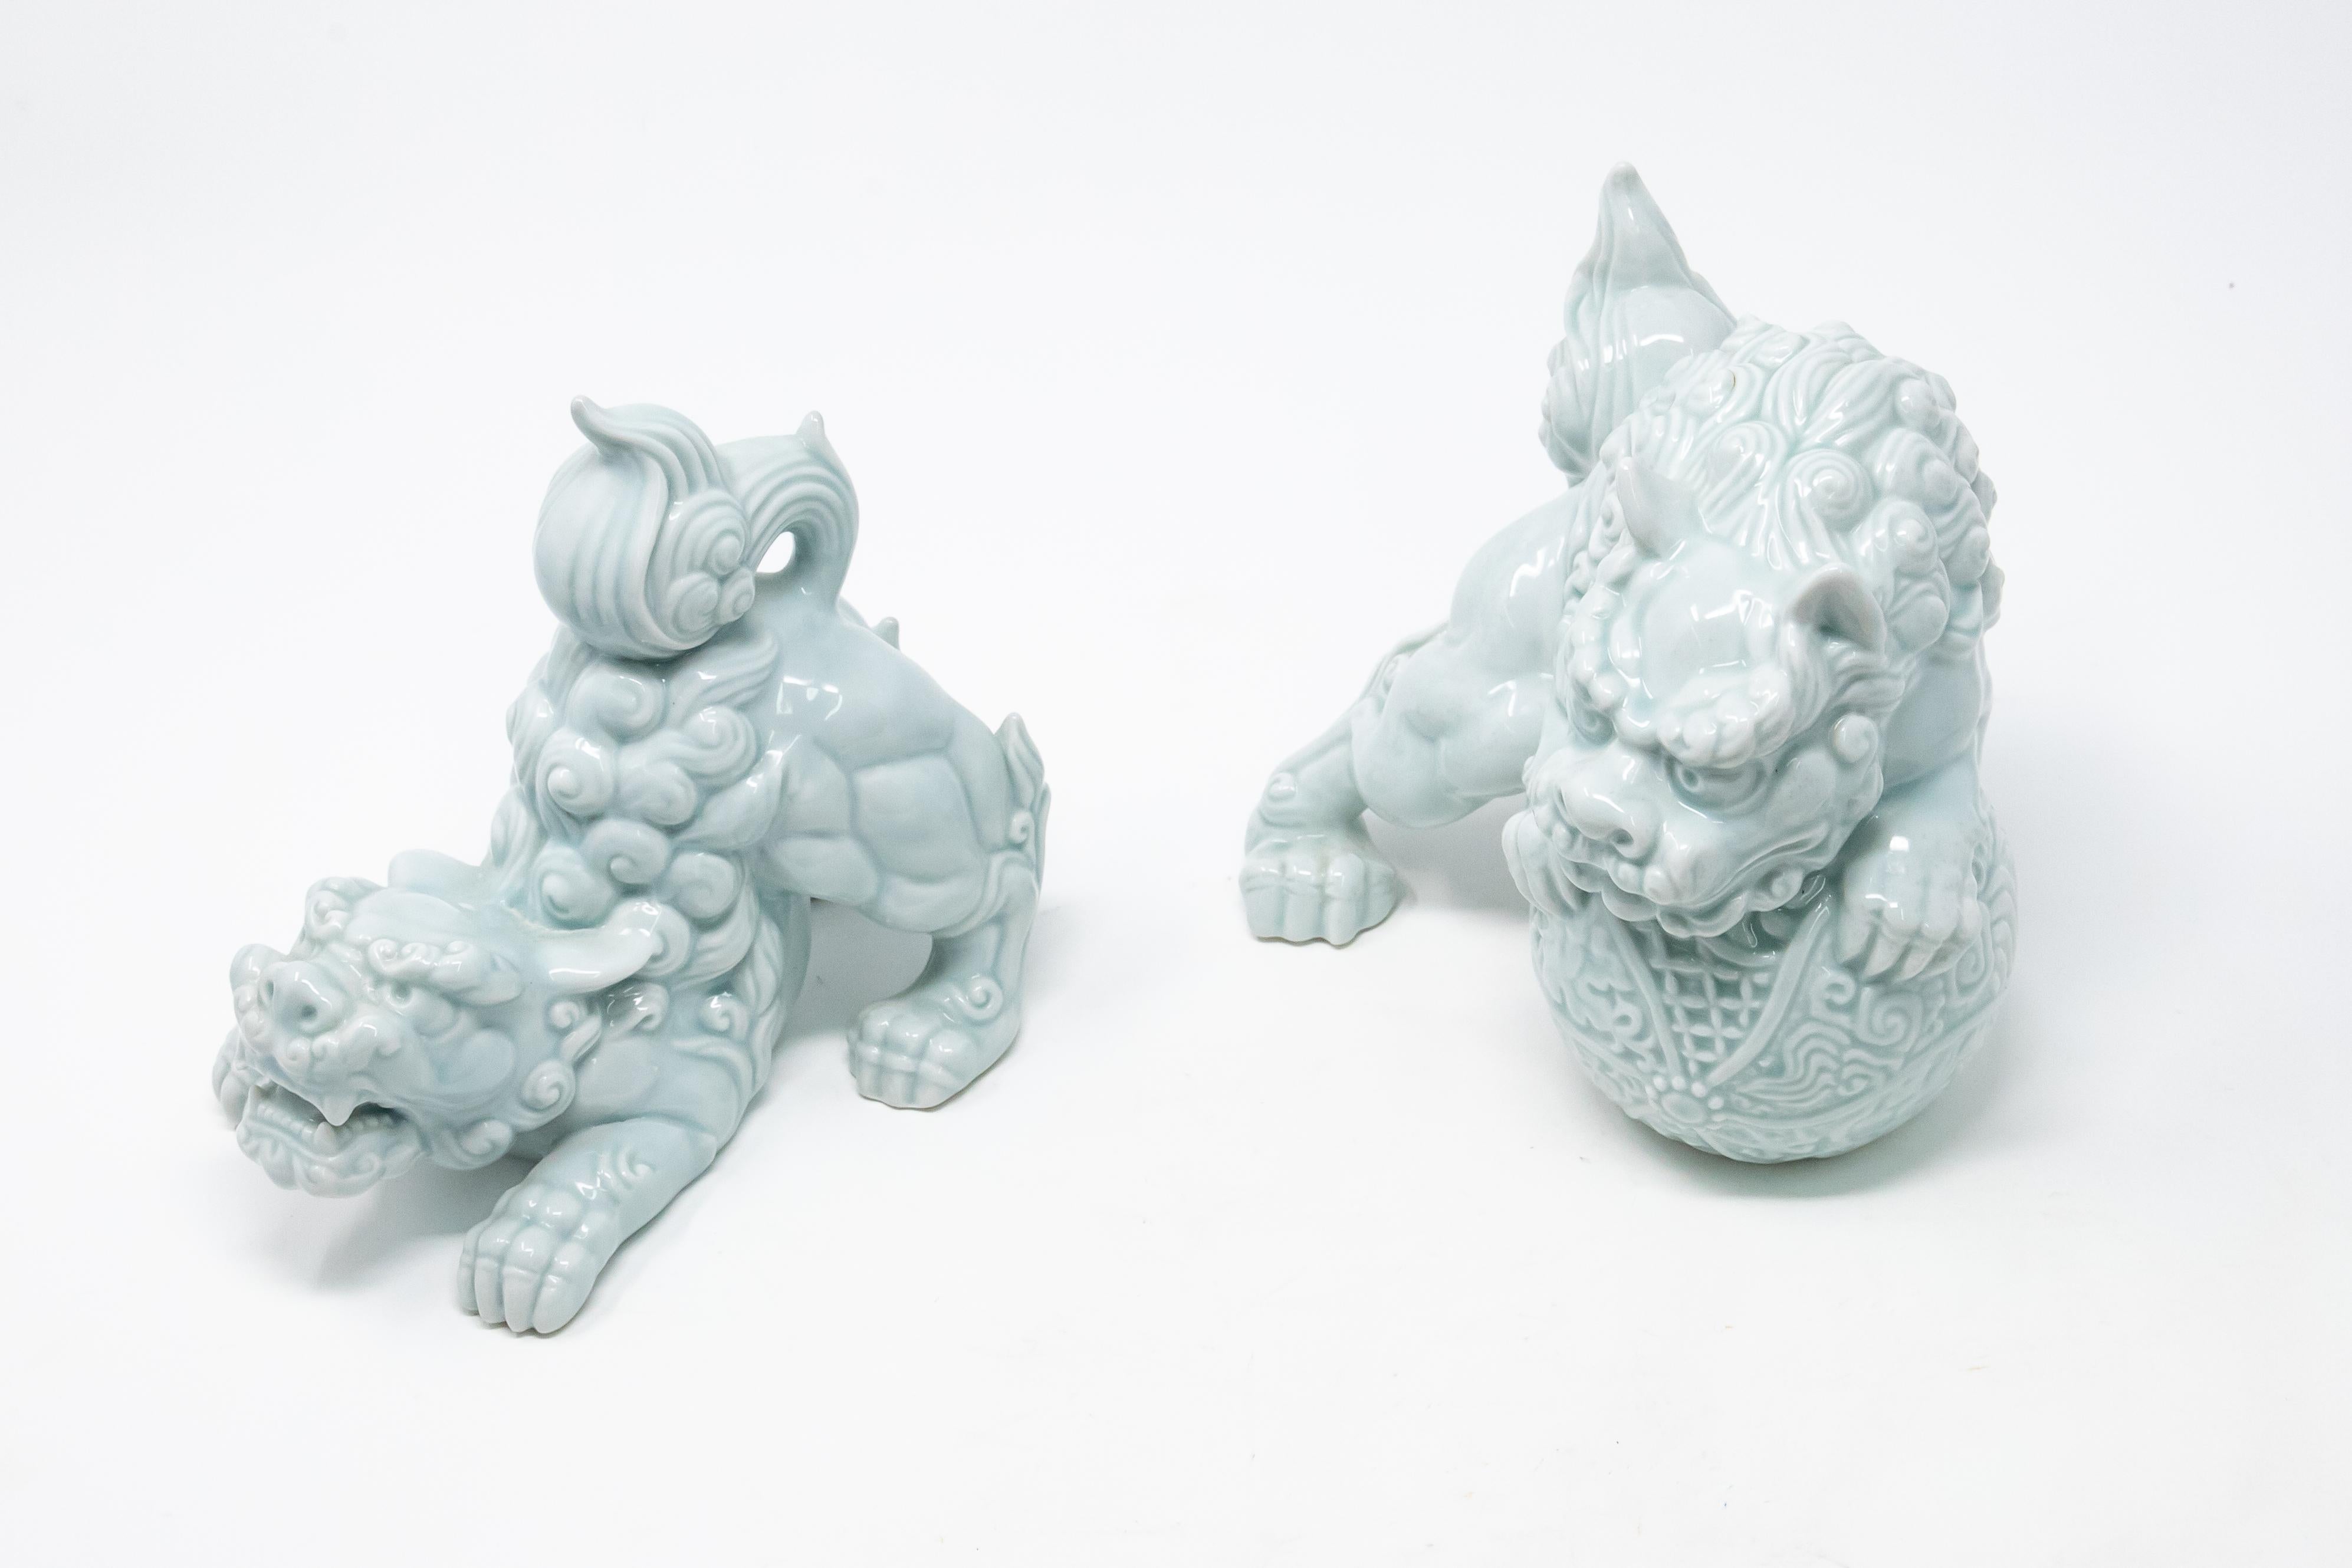 Offering this beautiful pair of Andrea by Sadek Celadon foo dogs. Gorgeous light turquoise color these are sure to stand out wherever you choose to put them. One is in a downward dog position that is playful. The other it perched with its front legs